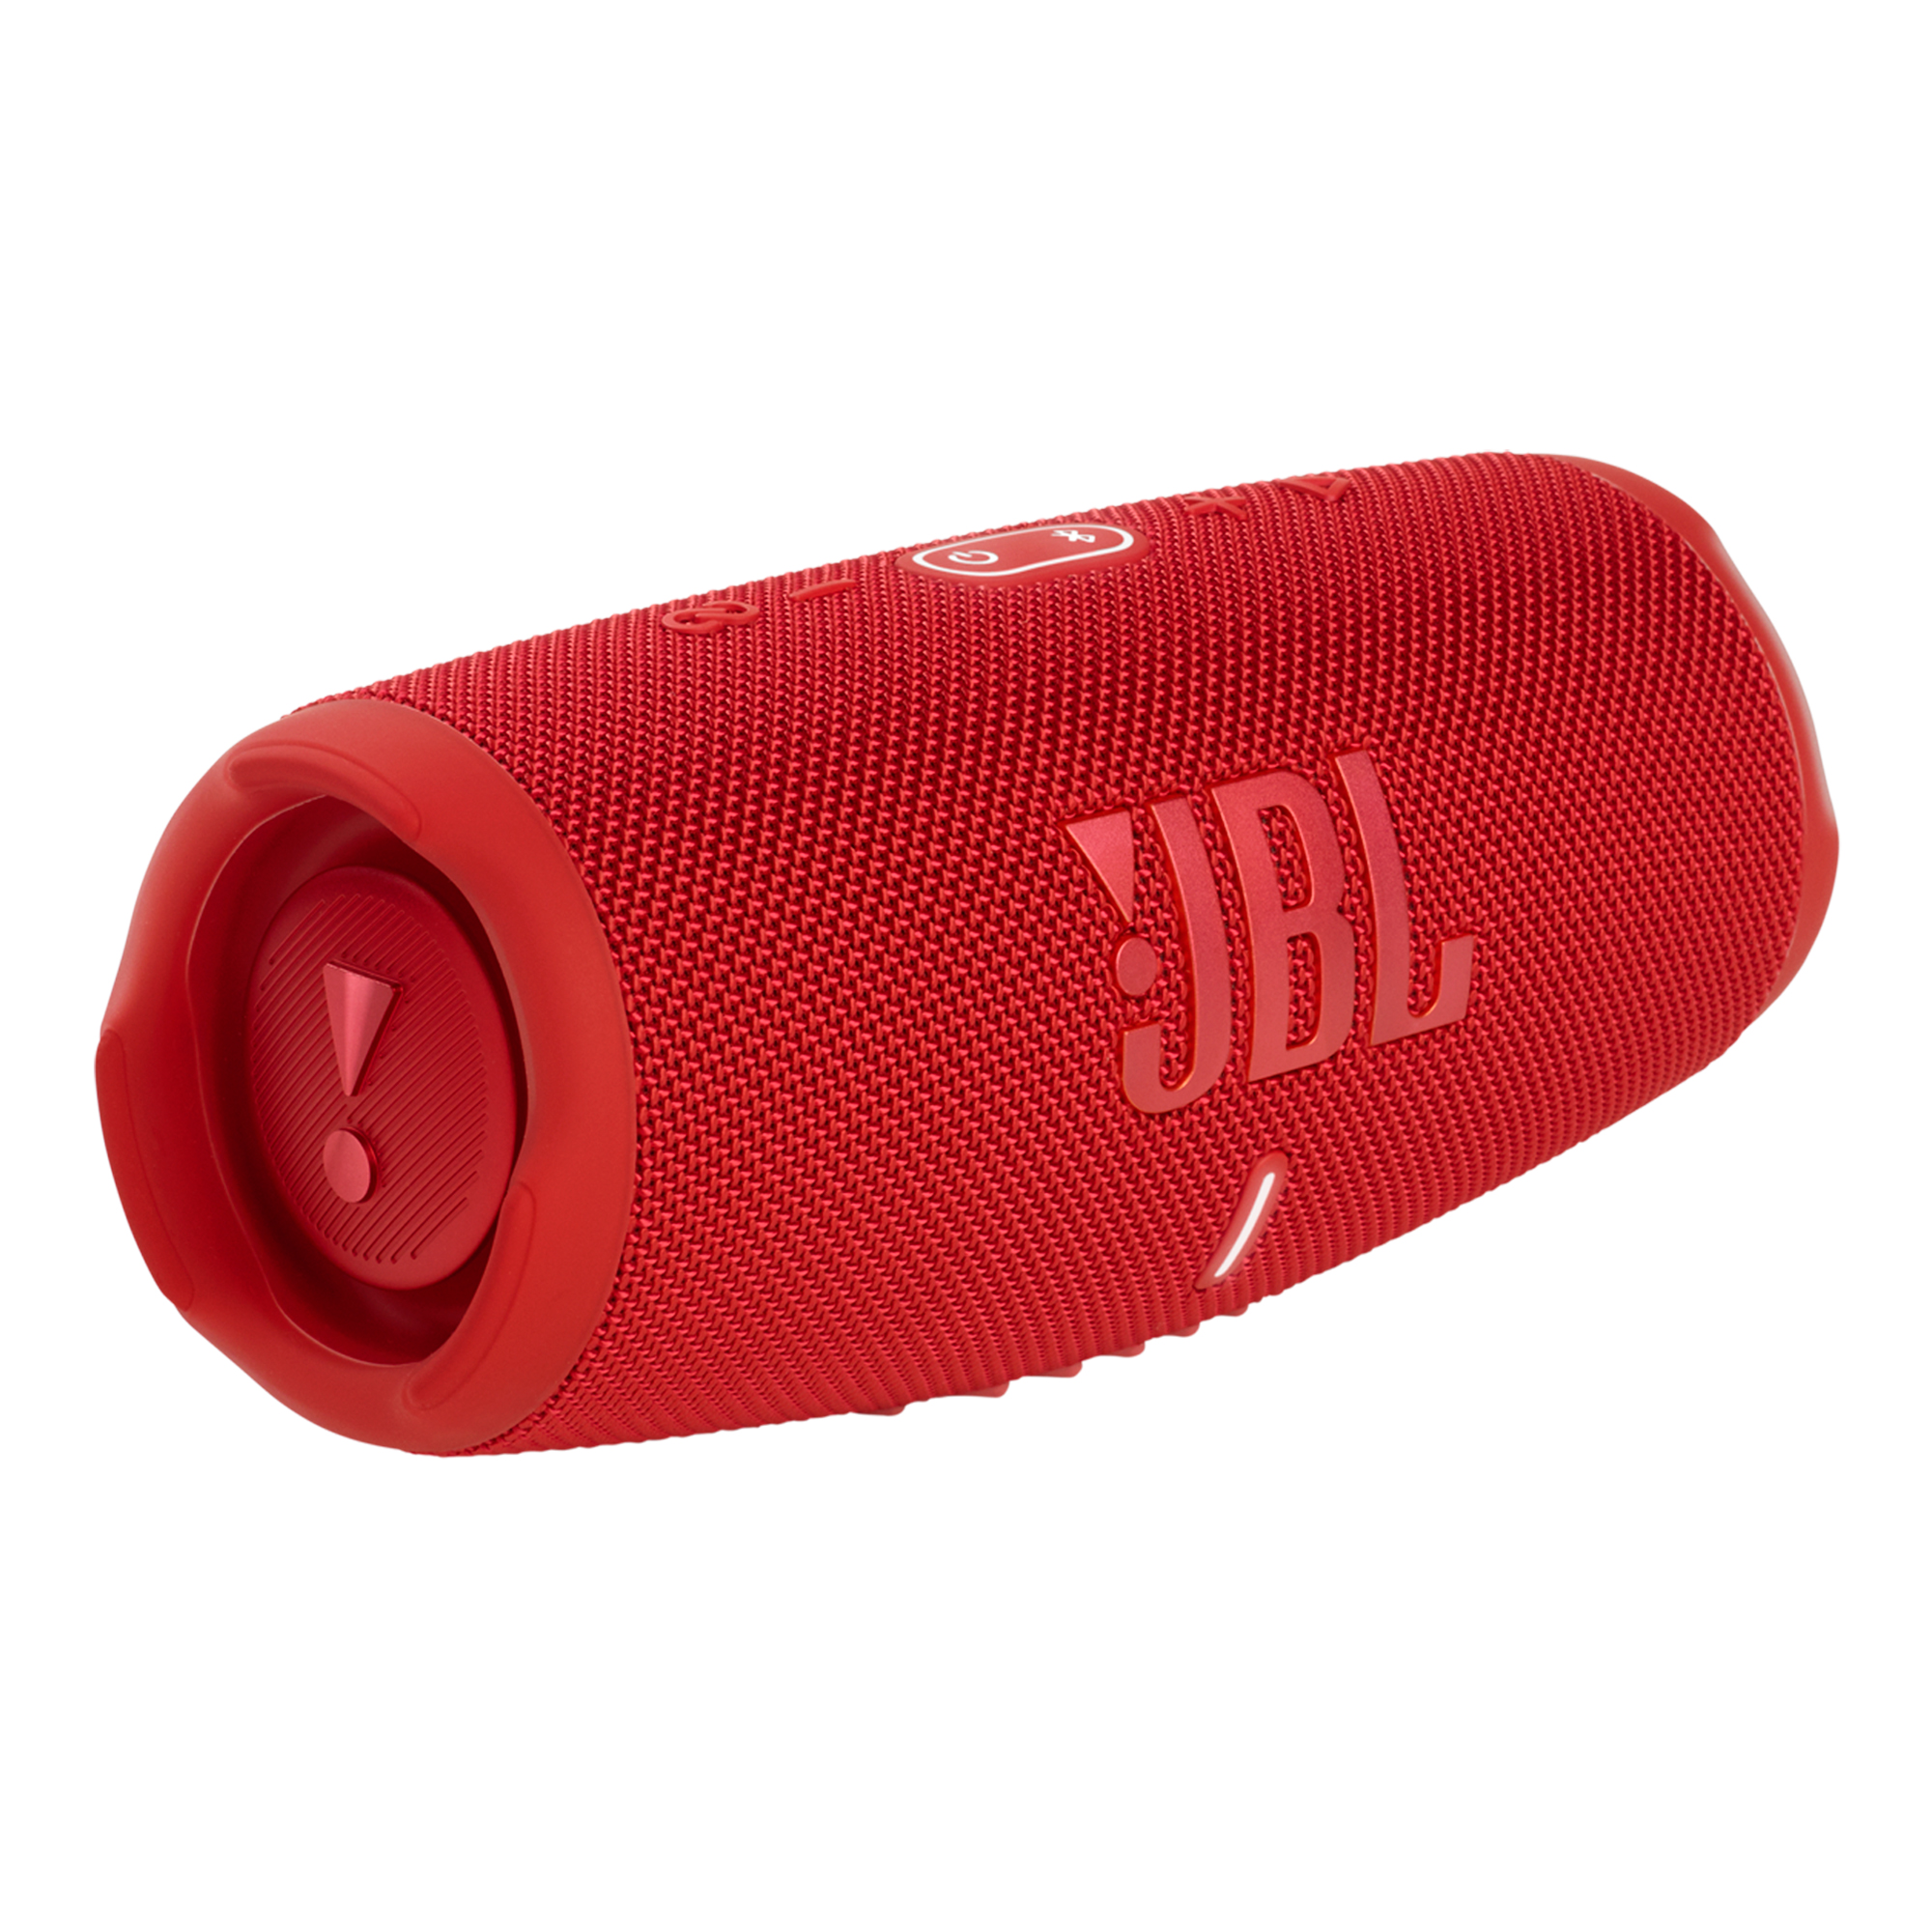 Parlante Inalmbrico Bluetooth Jbl Charge 5 Ip67 30w